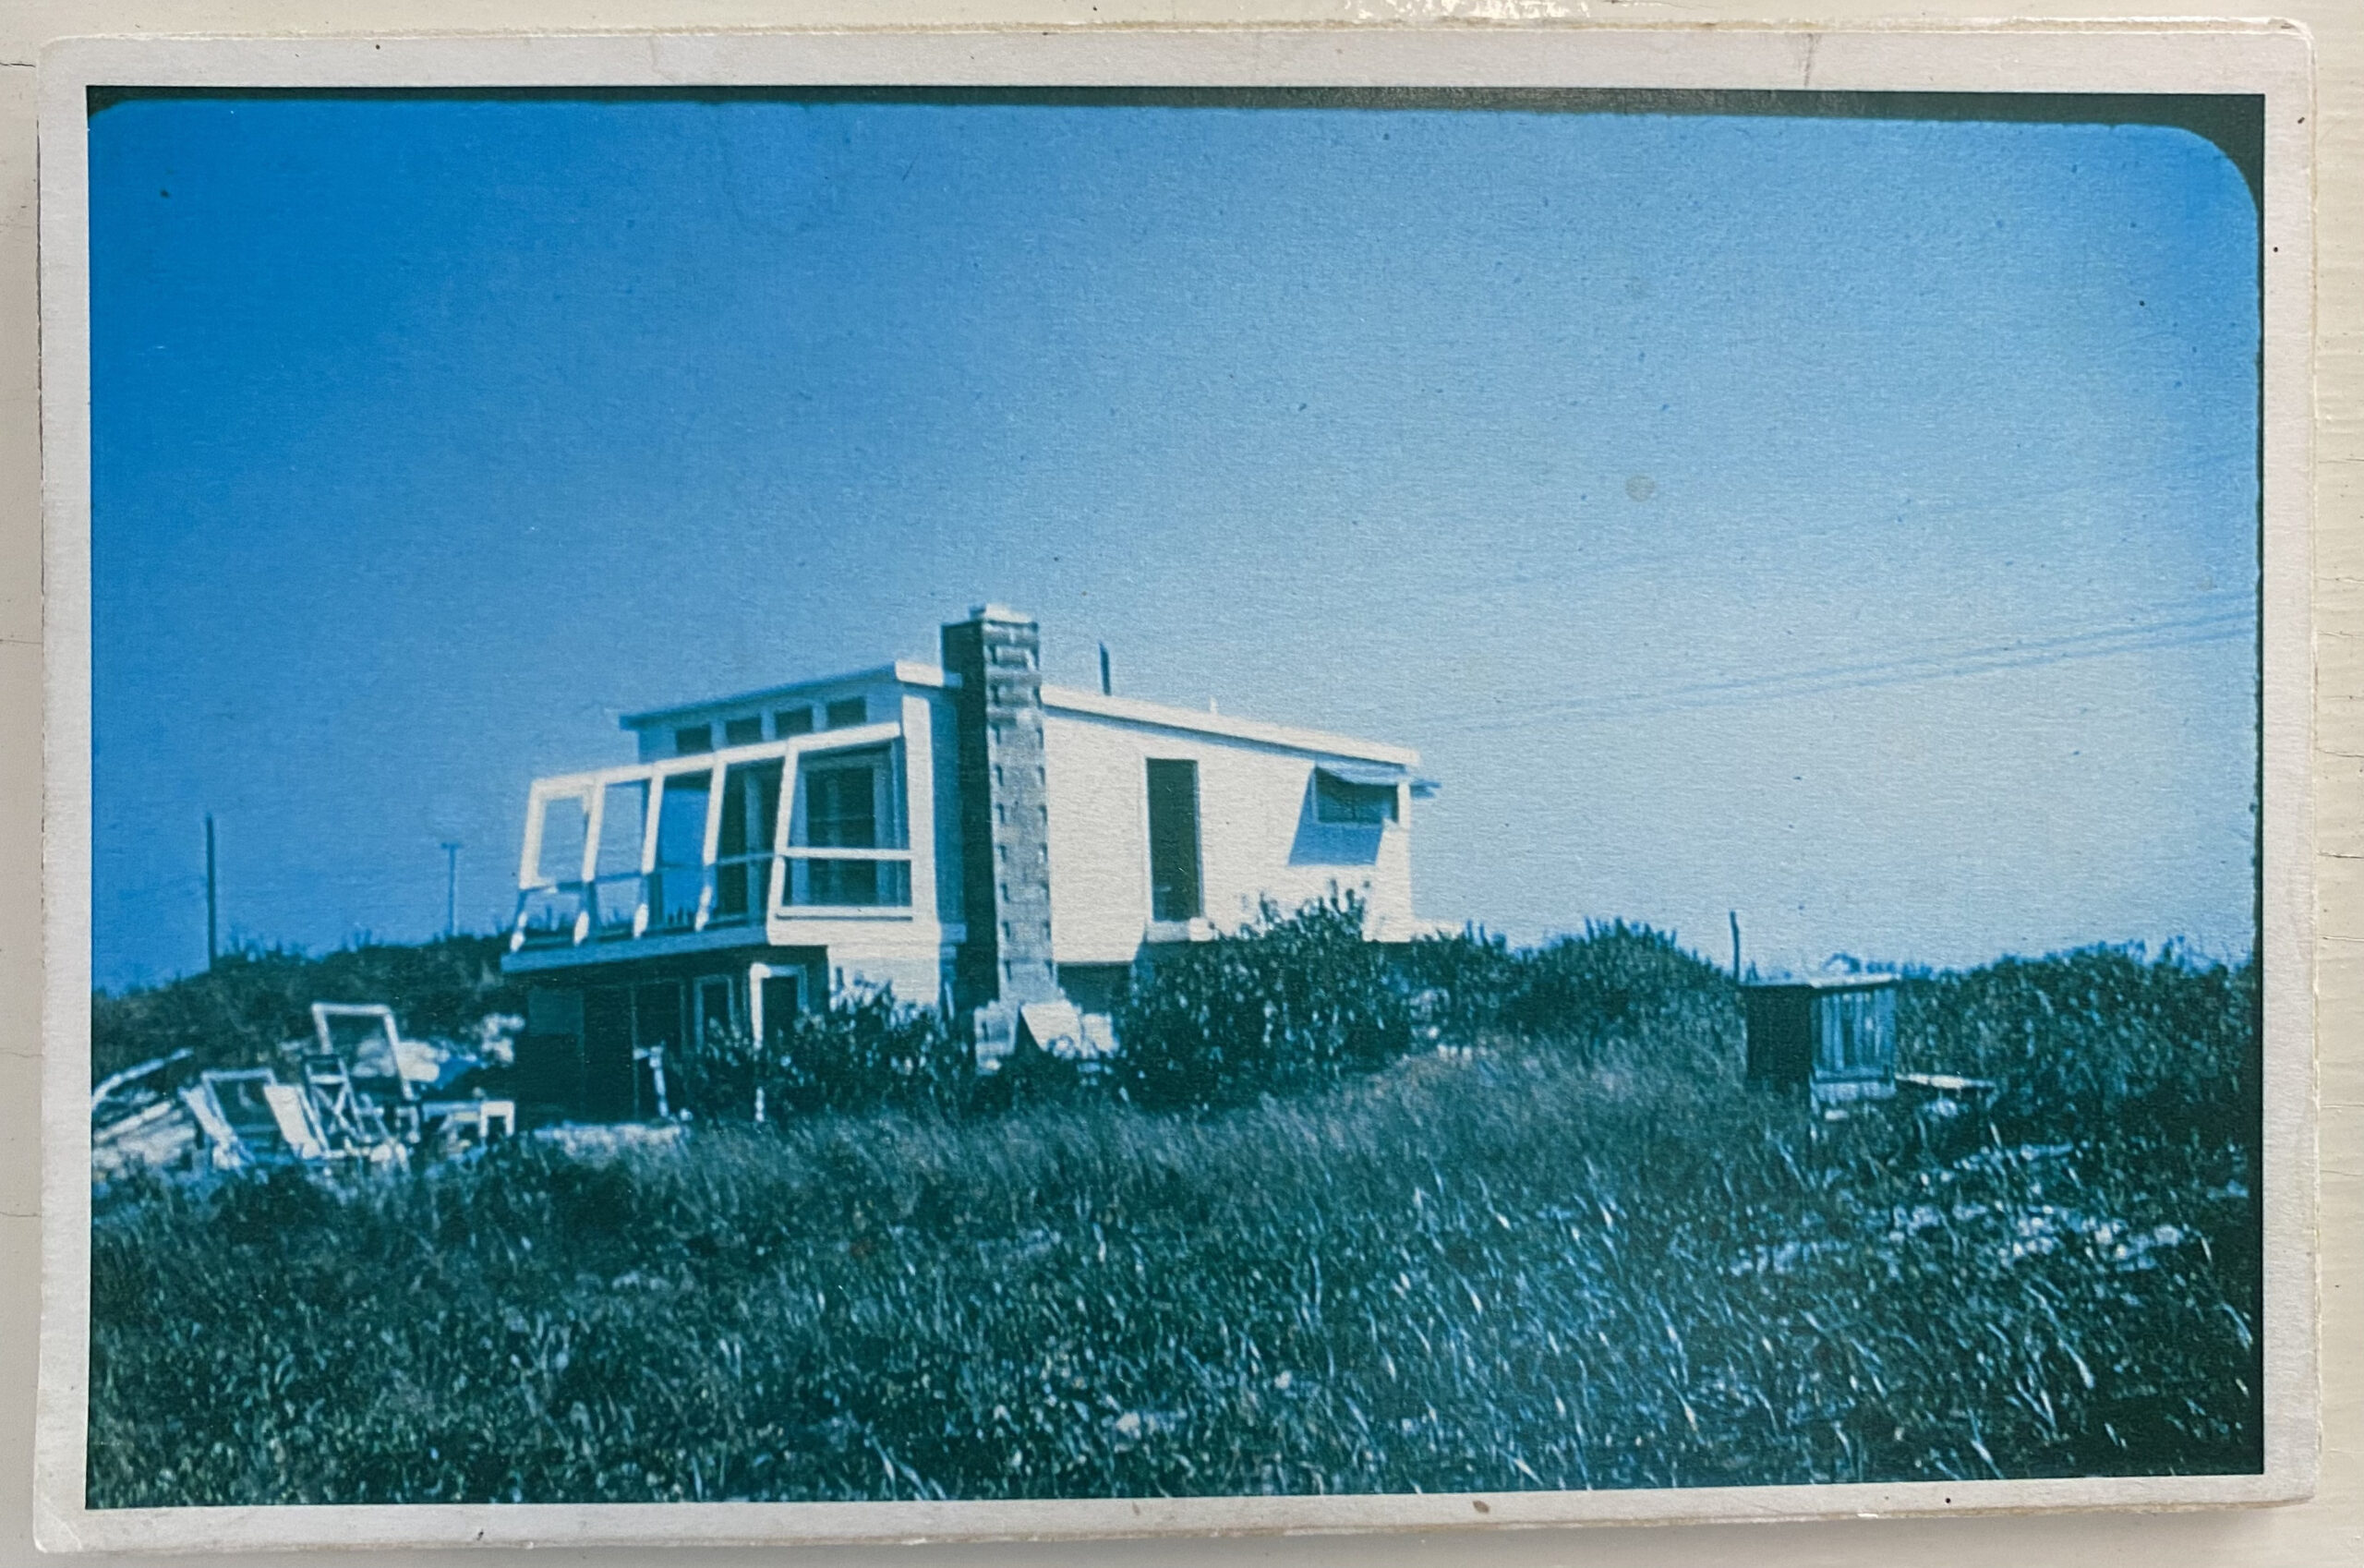 A picture of the house in its initial construction.